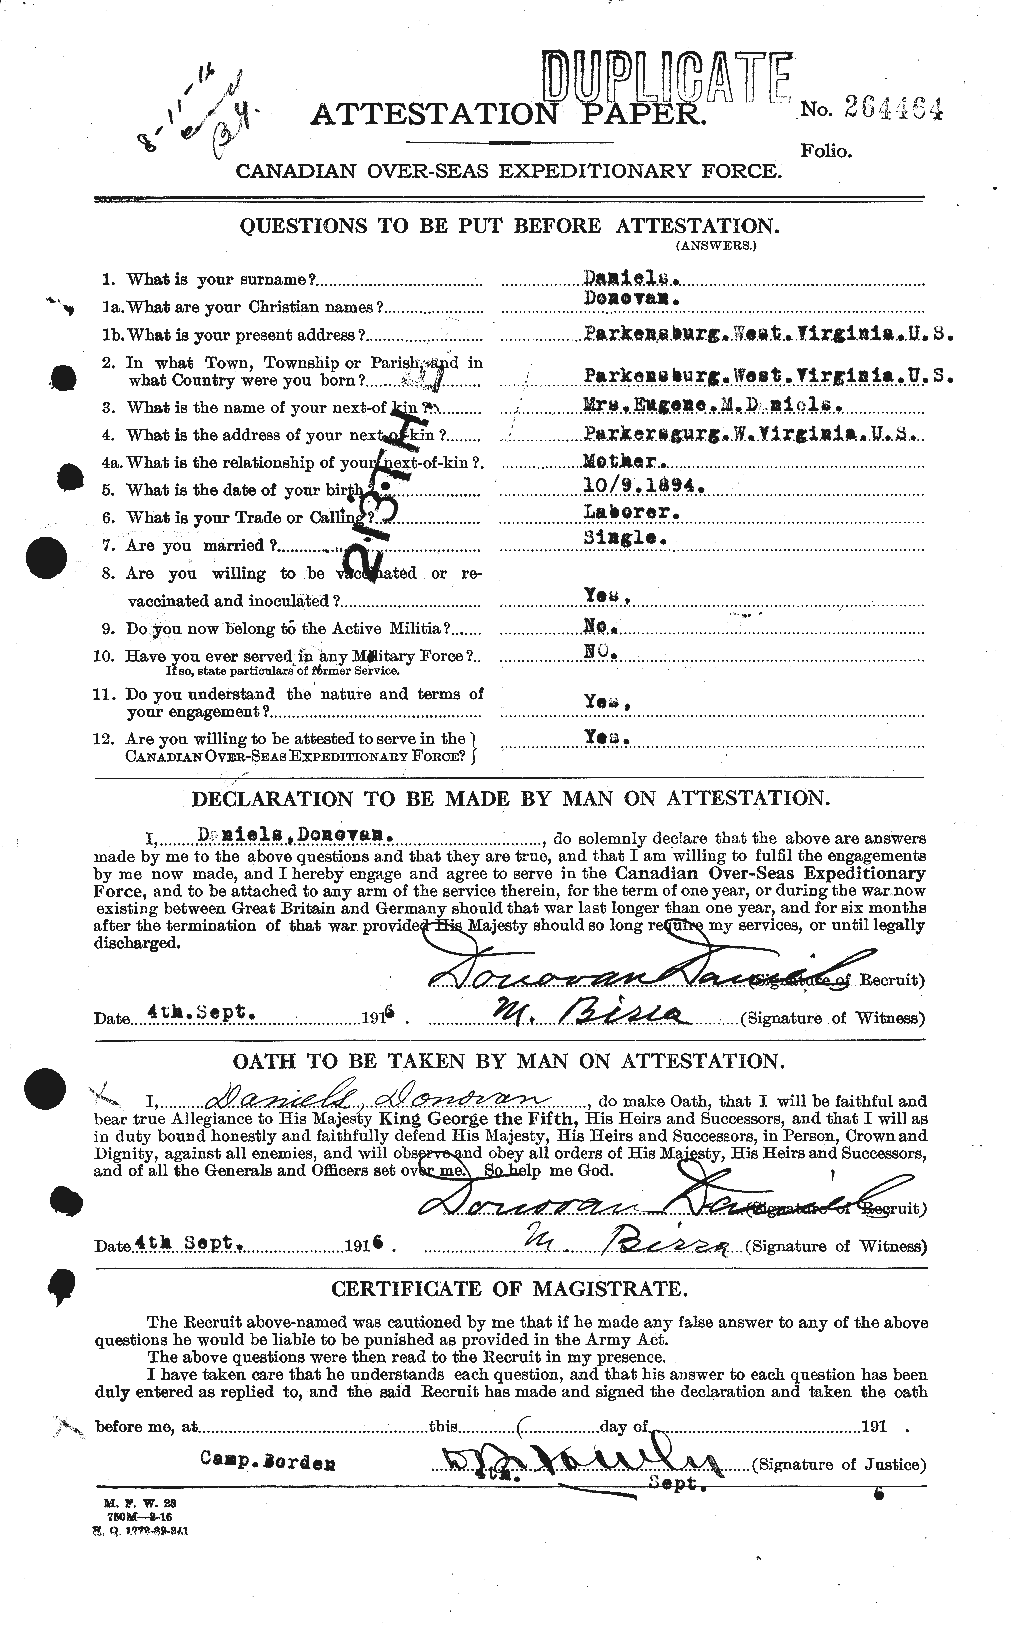 Personnel Records of the First World War - CEF 279579a